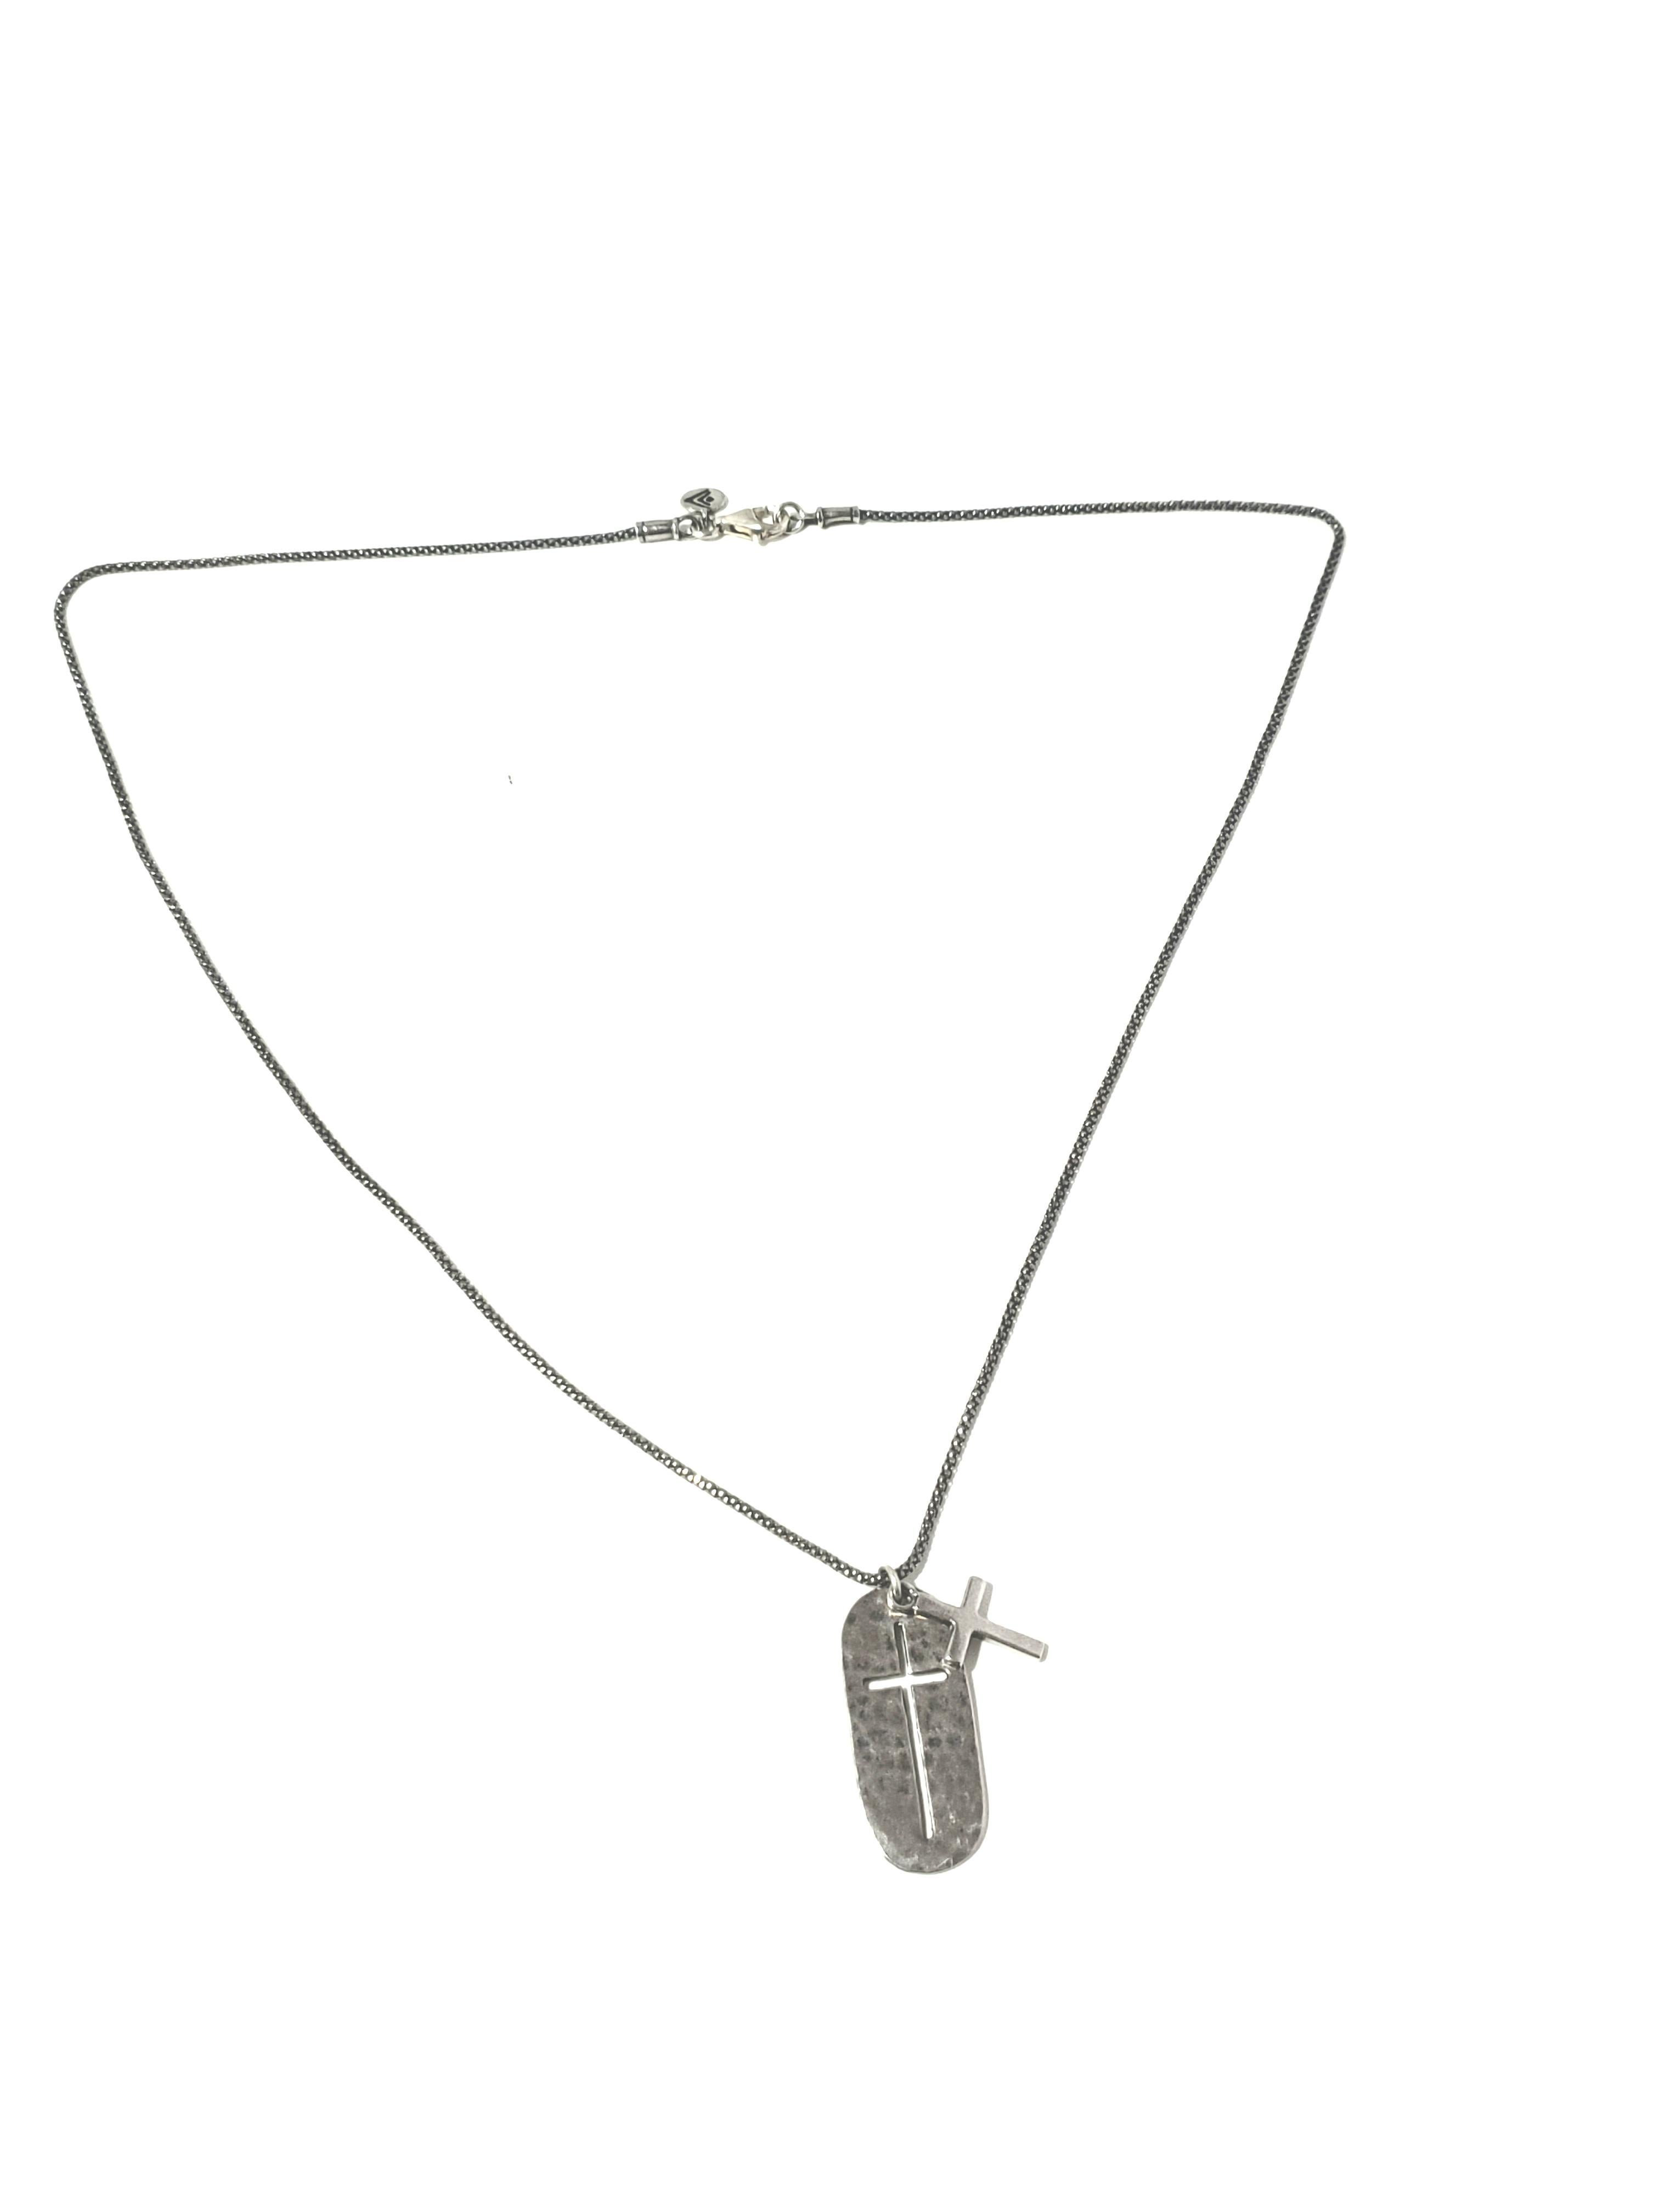 Silpada Sterling Silver Hammered Dog Tag Cross Necklace

Featured is a Silpada oxidized .925 sterling silver cross dog tag style necklace. Cutout cross pendant with a smaller cross charm in front.

Measurements:     Necklace measures  22 inches. 